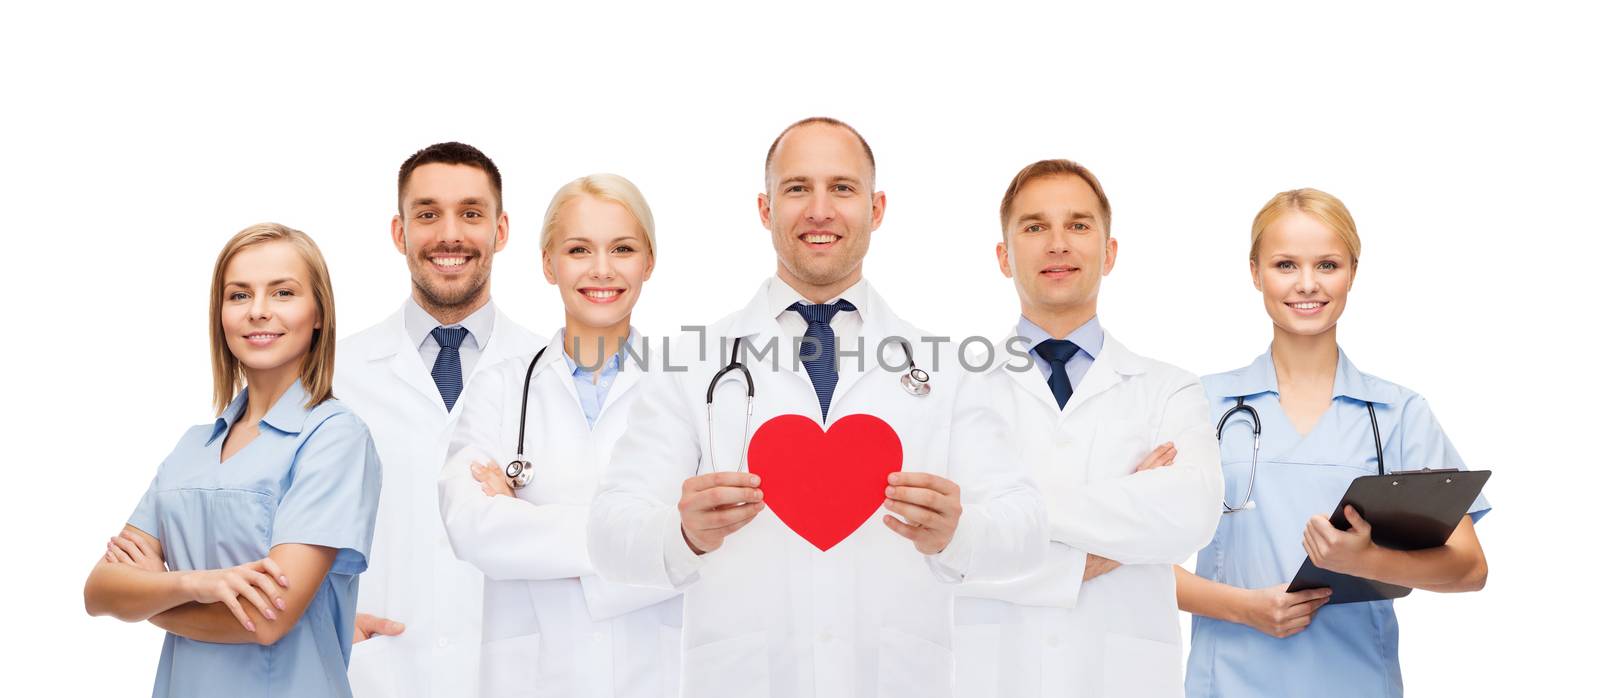 medicine, profession, teamwork and healthcare concept - group of smiling medics or doctors holding red paper heart shape, clipboard and stethoscopes over white background